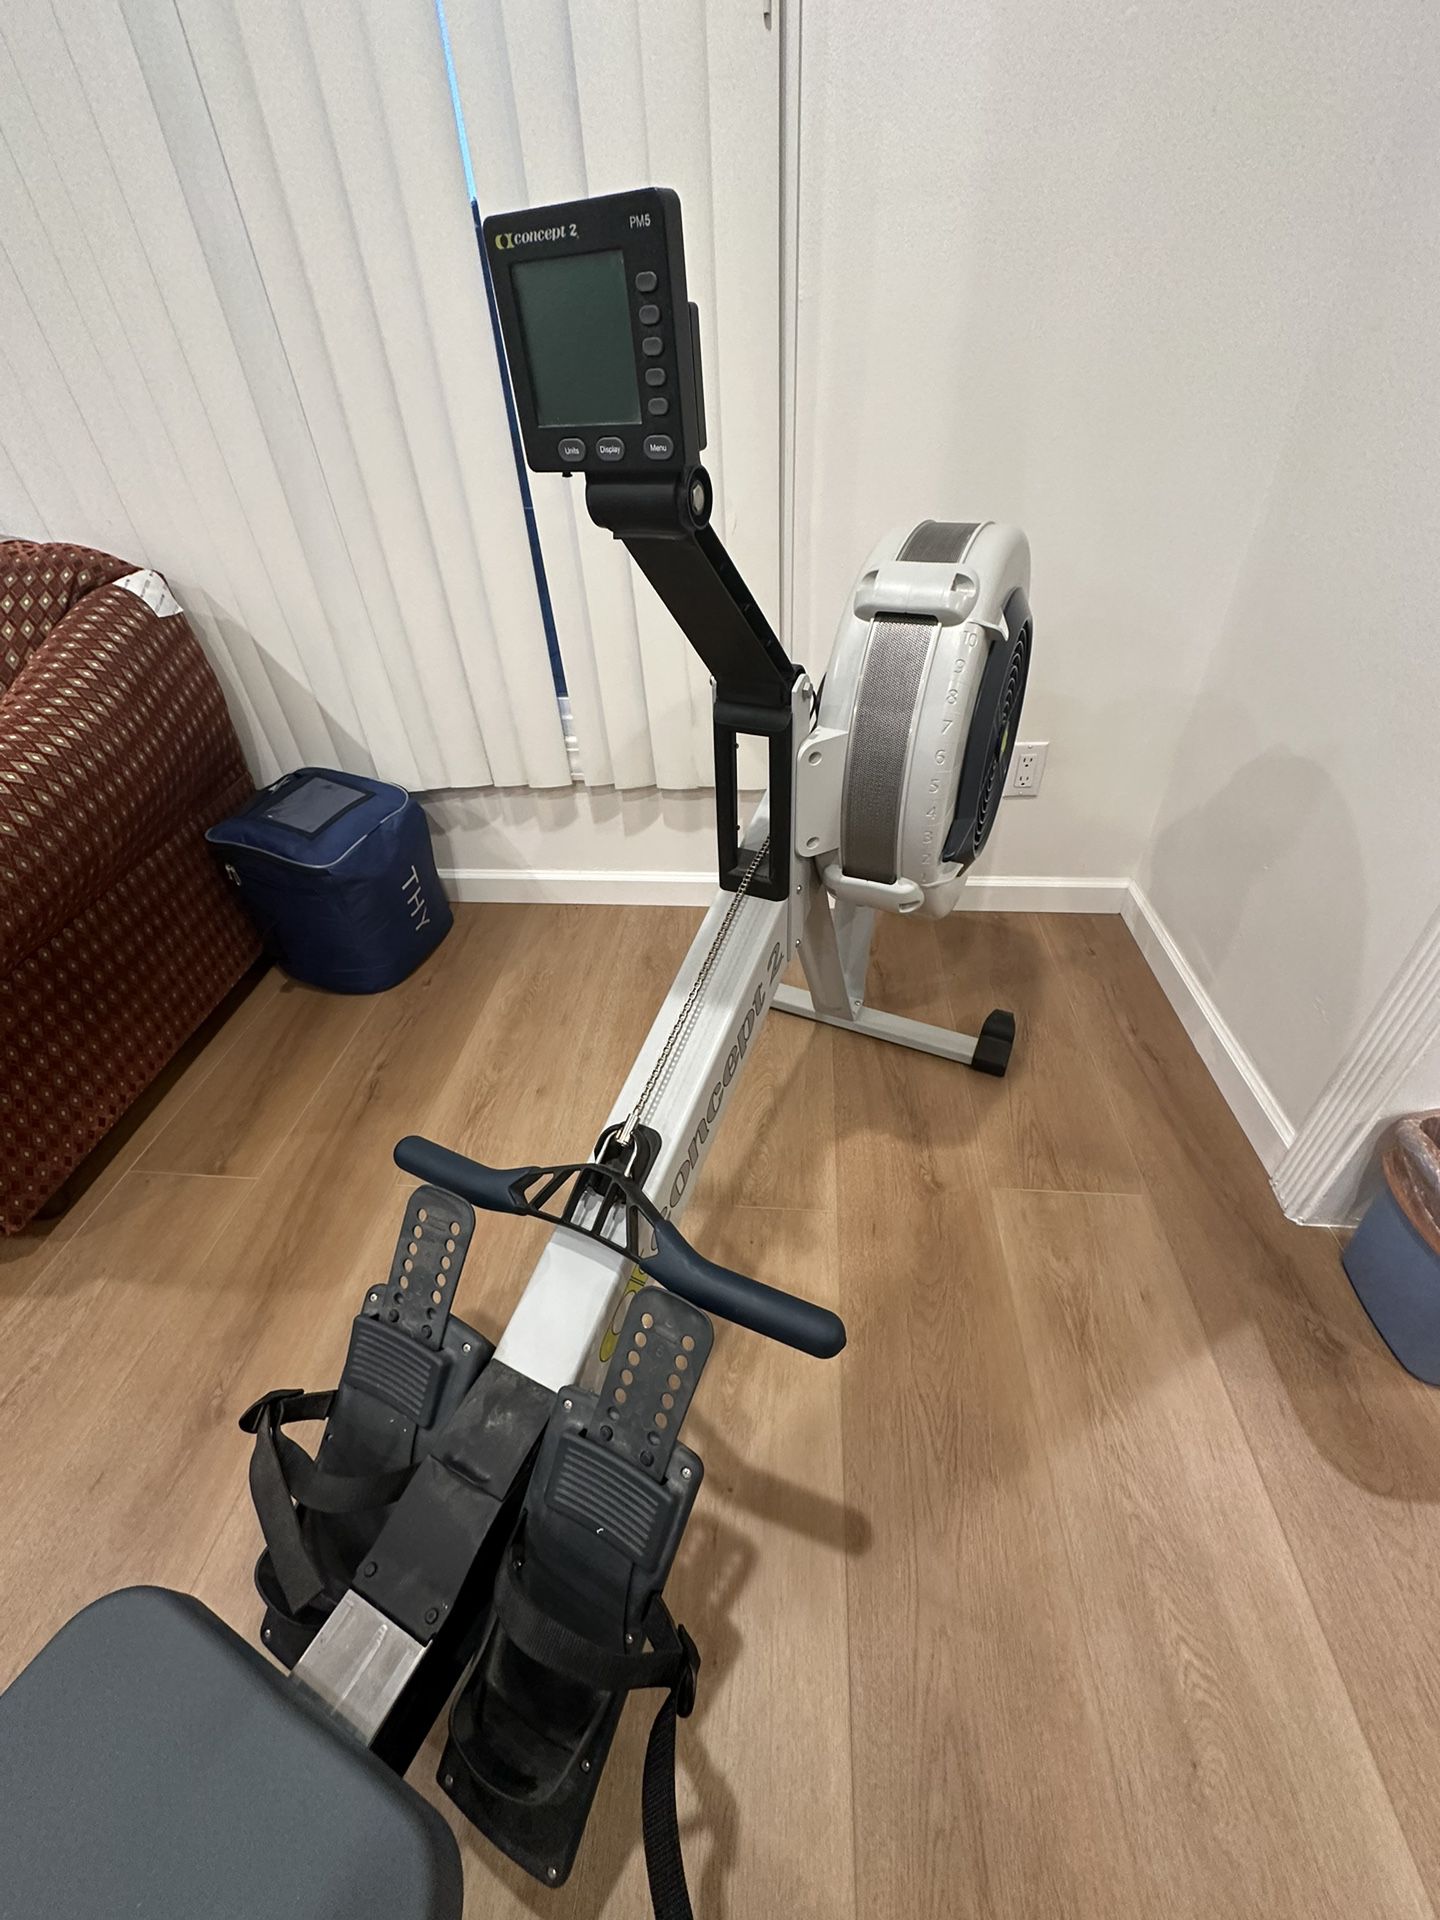 ROWER Concept 2 Model D with PM5 